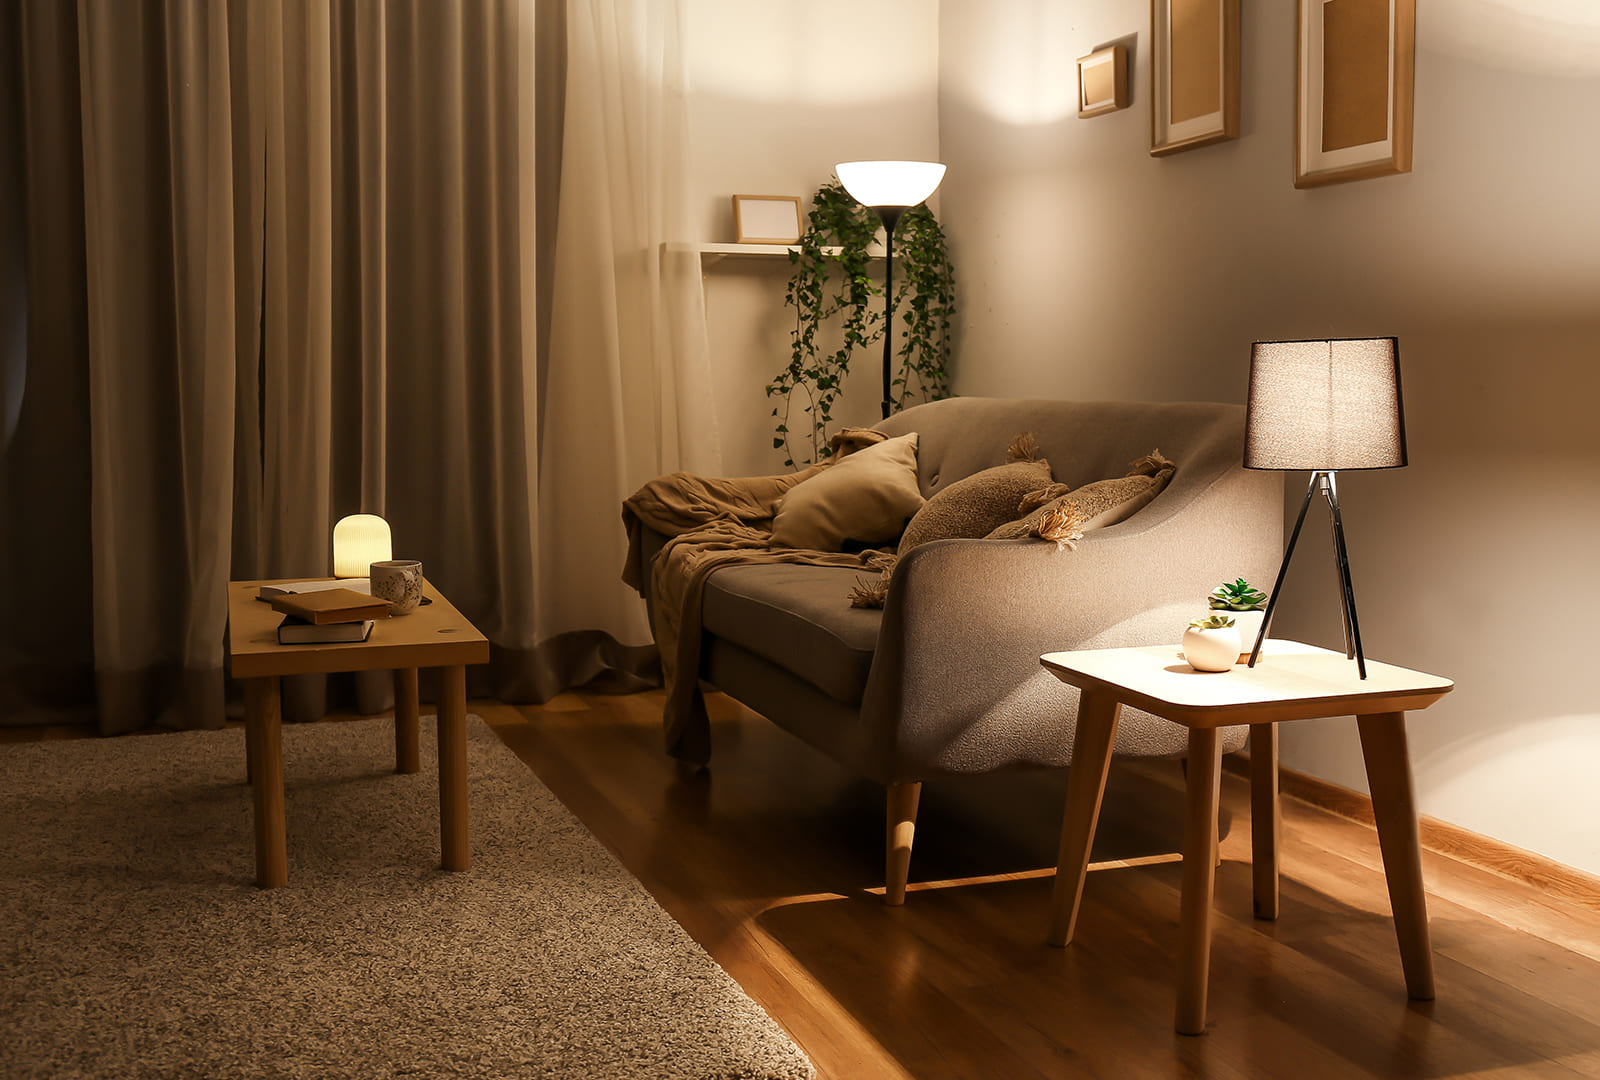 How Light Impacts The Look & Feel Of A Room